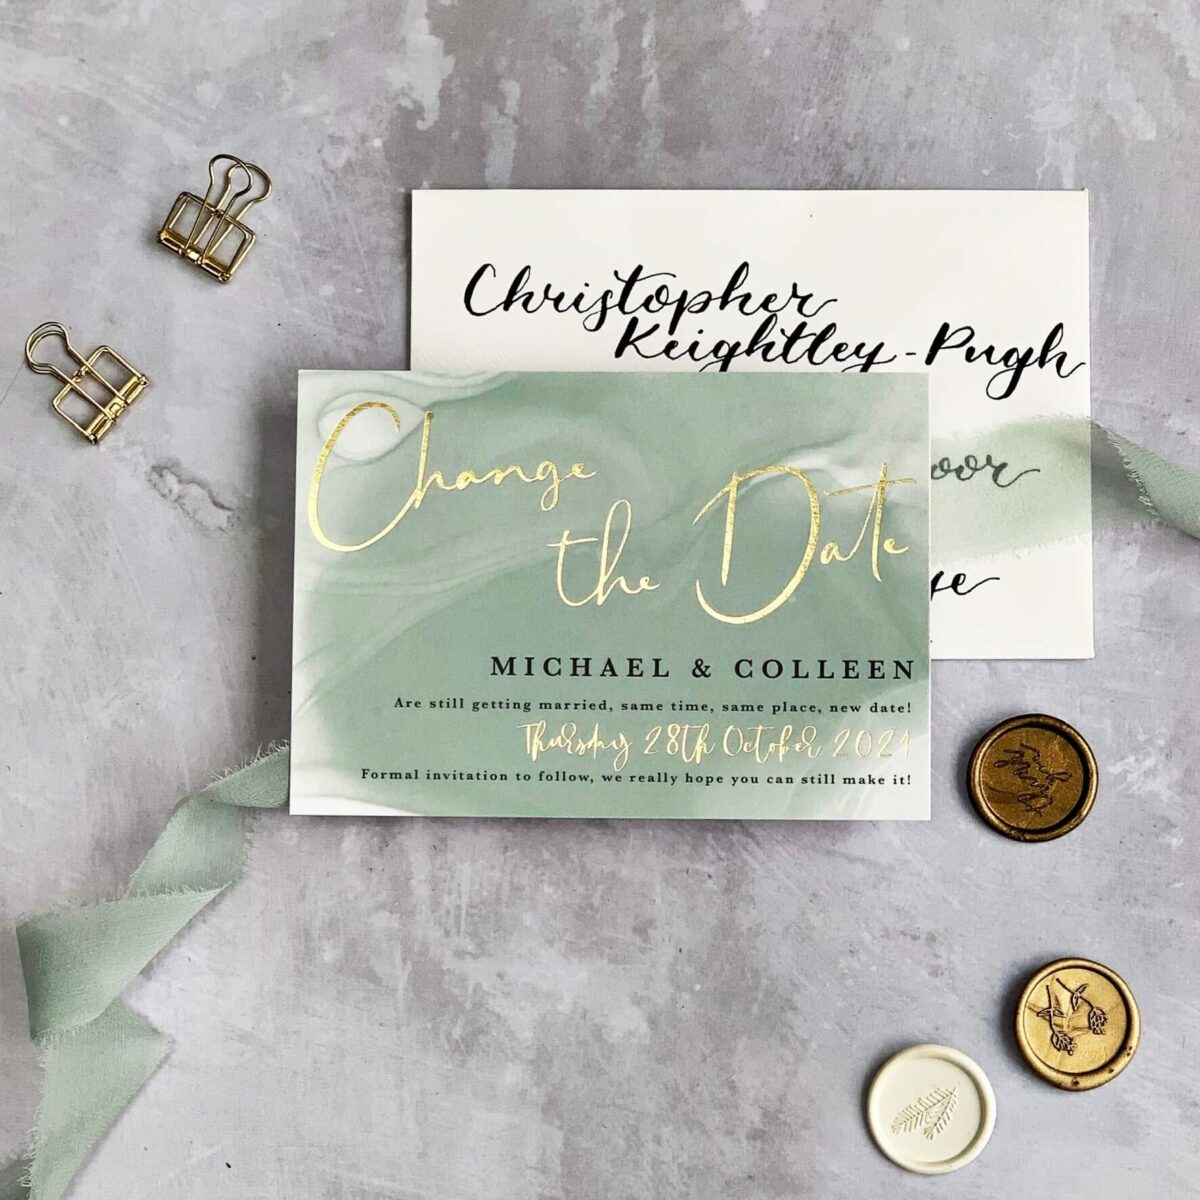 Digitally printed Wedding Invitations produced by Clare Gray Designs in Cambridge Hot foiled in Gold